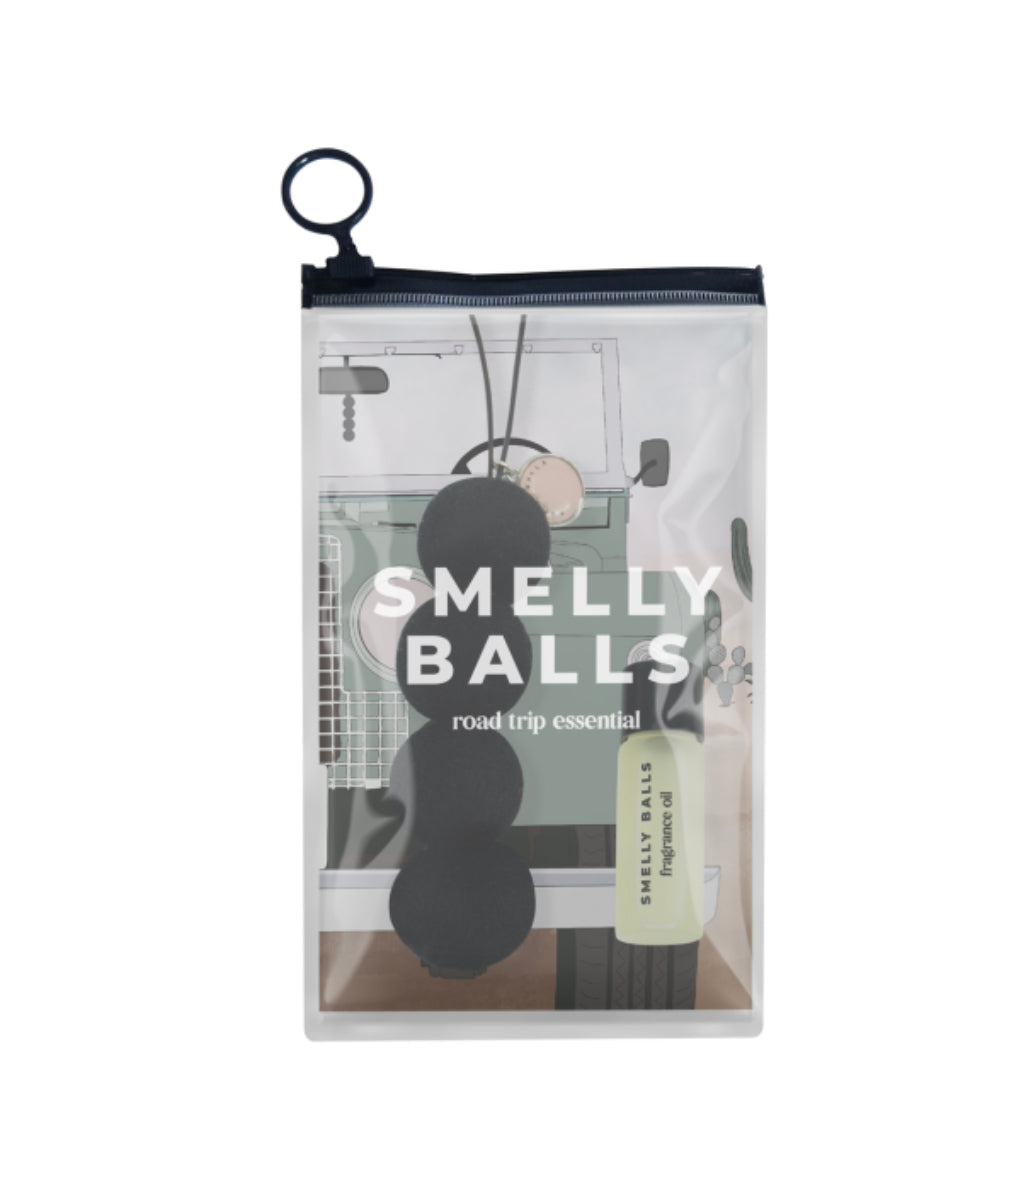 ONYX Smelly Balls set Accessories Smelly Balls   